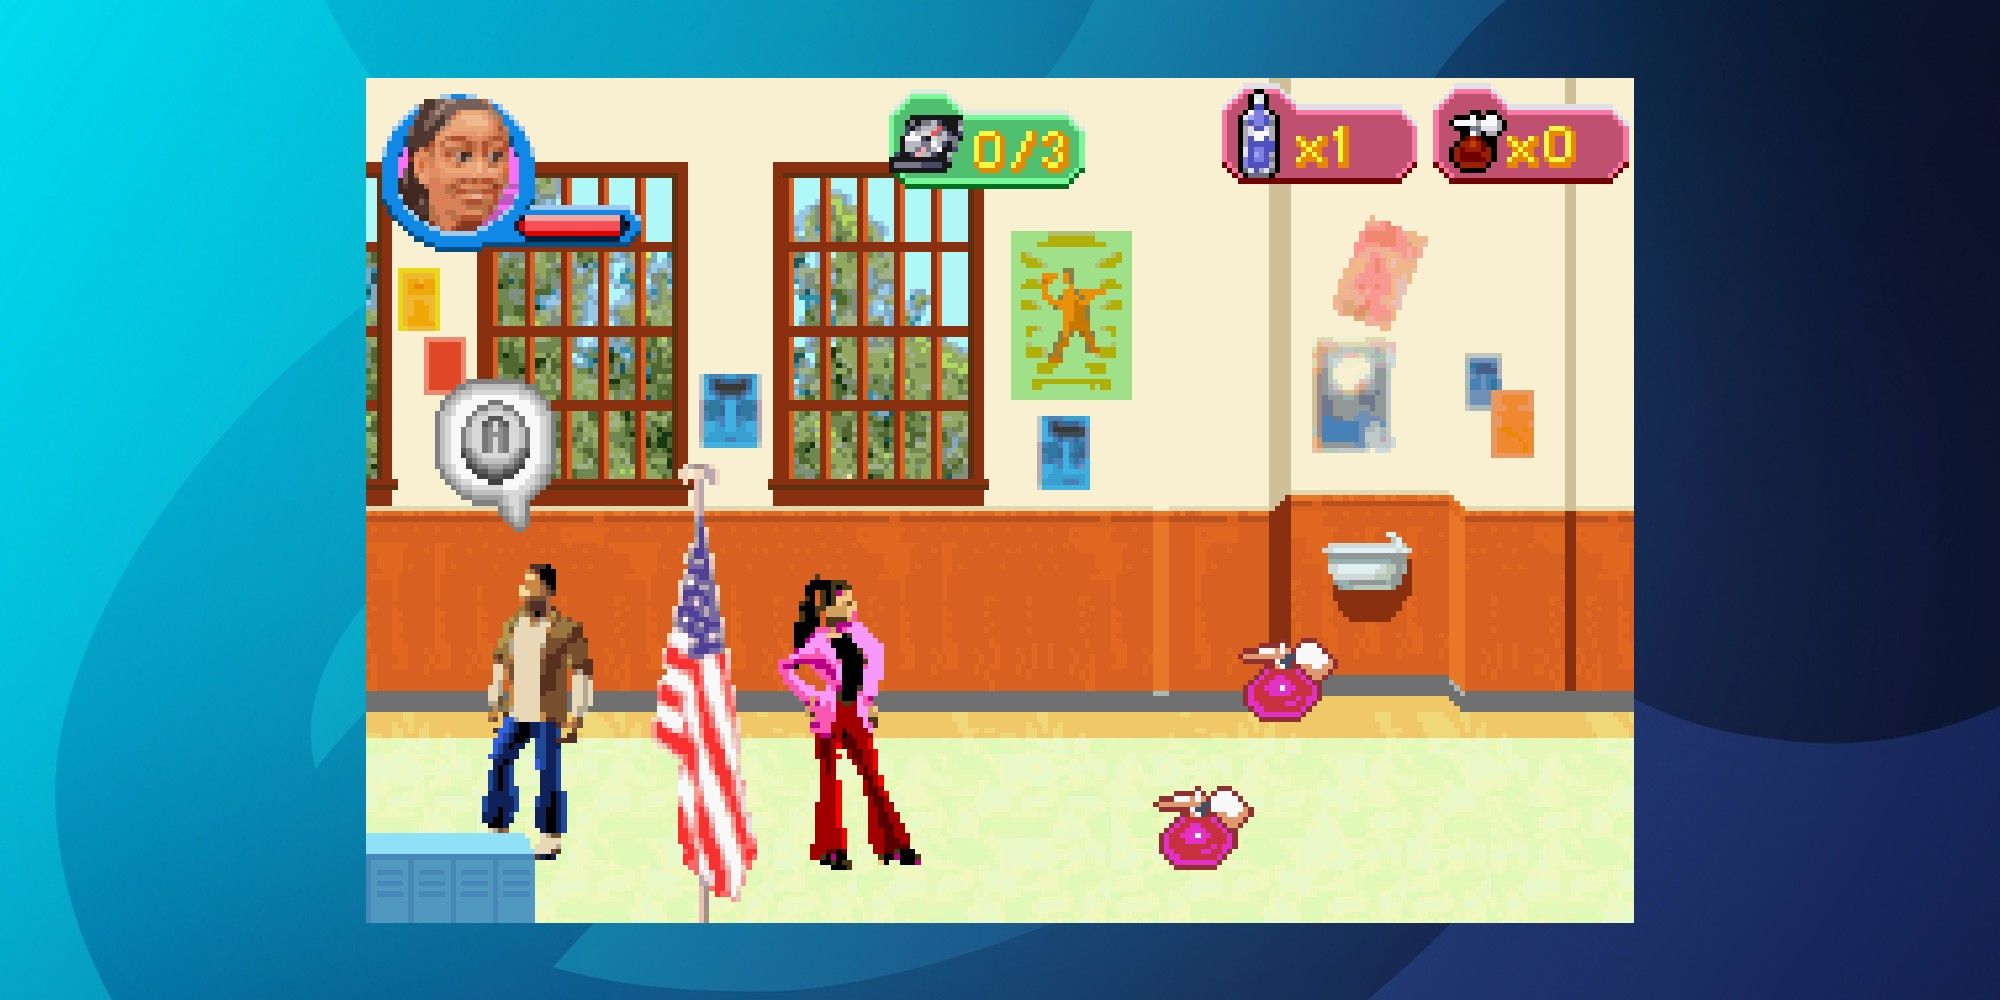 a screenshot of the game with Raven standing in the middle of the school hallway with the pick-ups in front of her